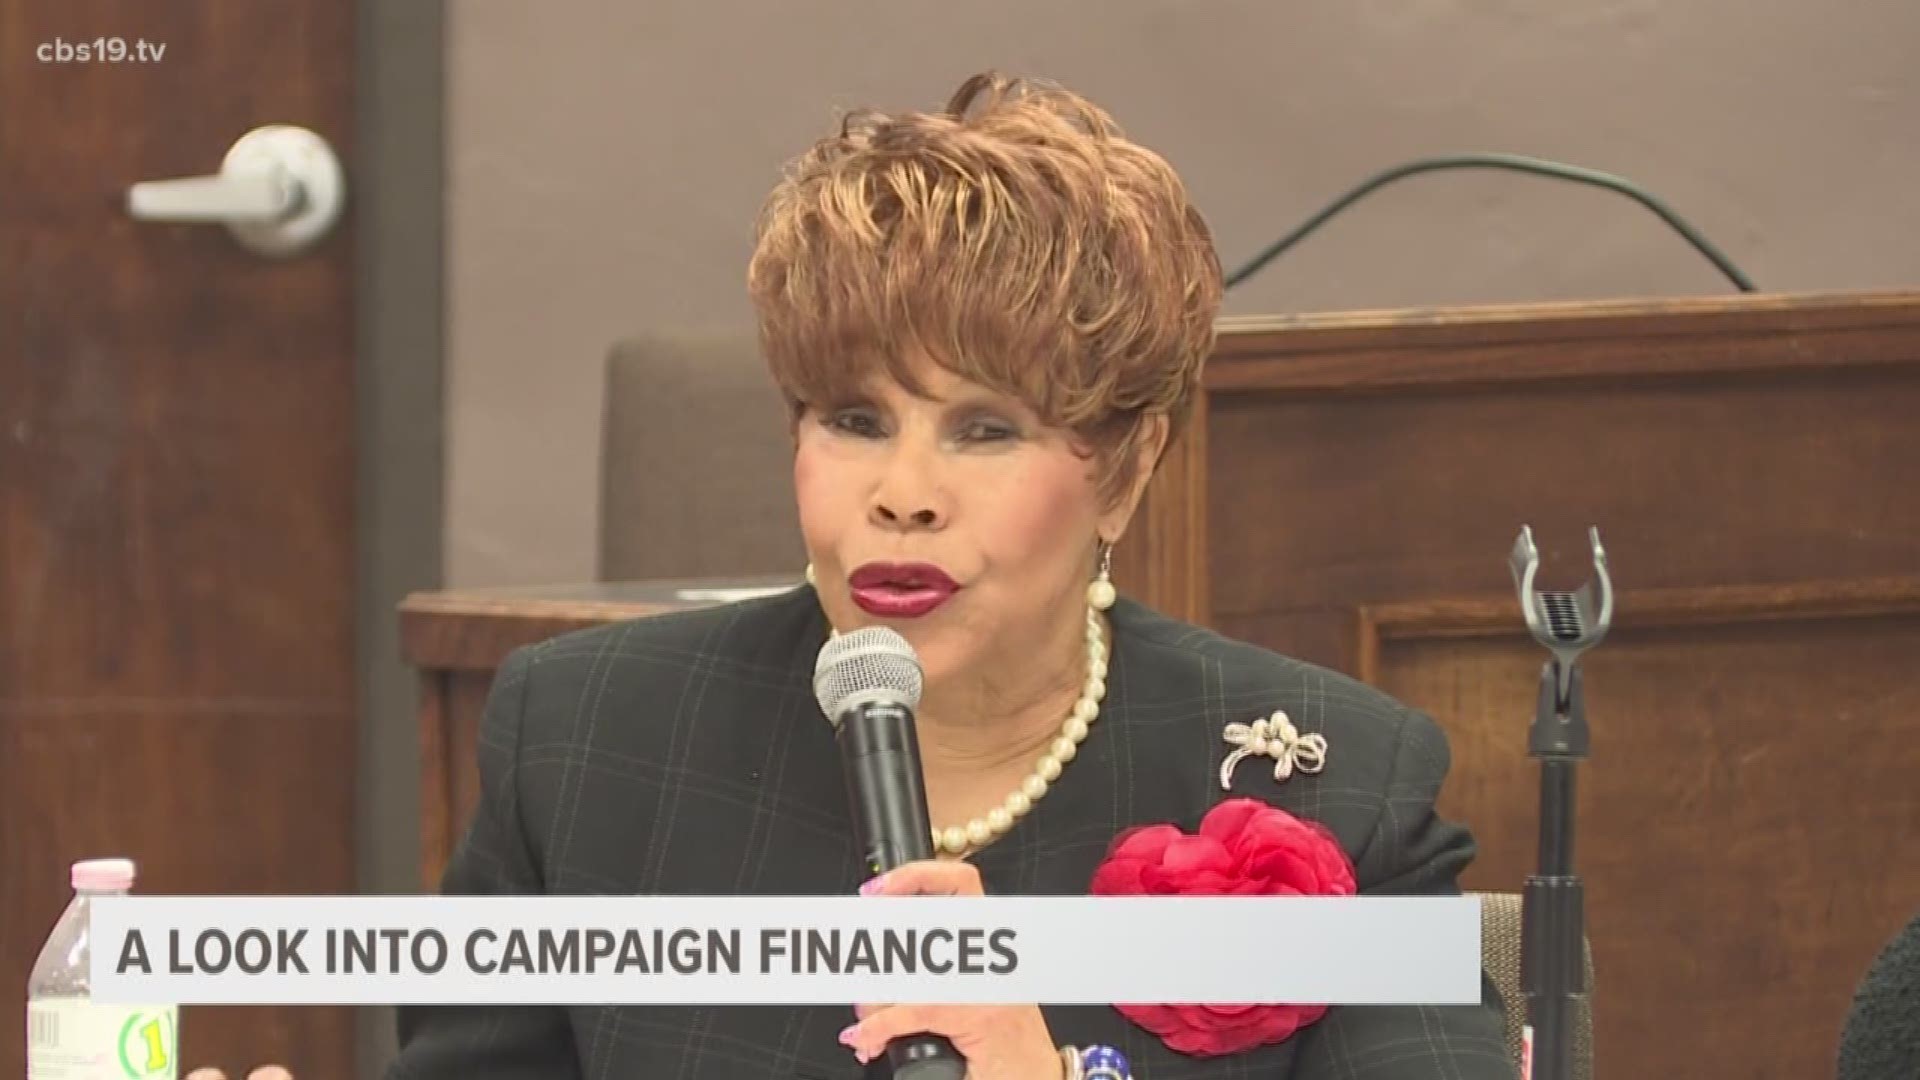 A complaint has been filed against Shirley McKellar claiming she failed to file any financial reports before the May 4th Tyler city council election.